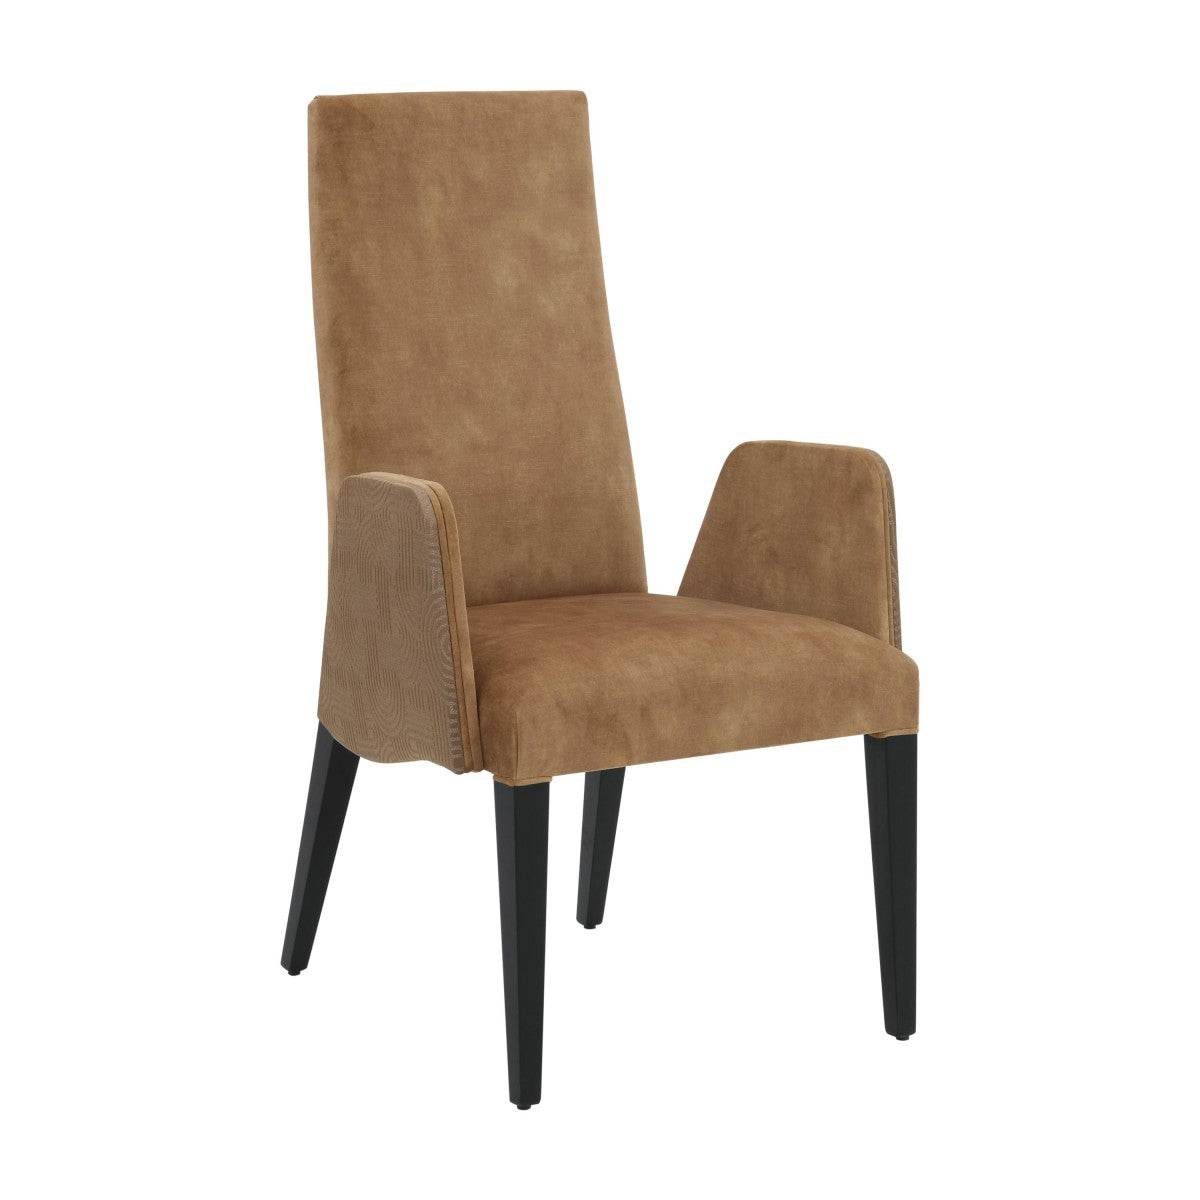 Wave Bespoke Upholstered Retro Contemporary Dining Armchair Chair MS027A Custom Made To Order